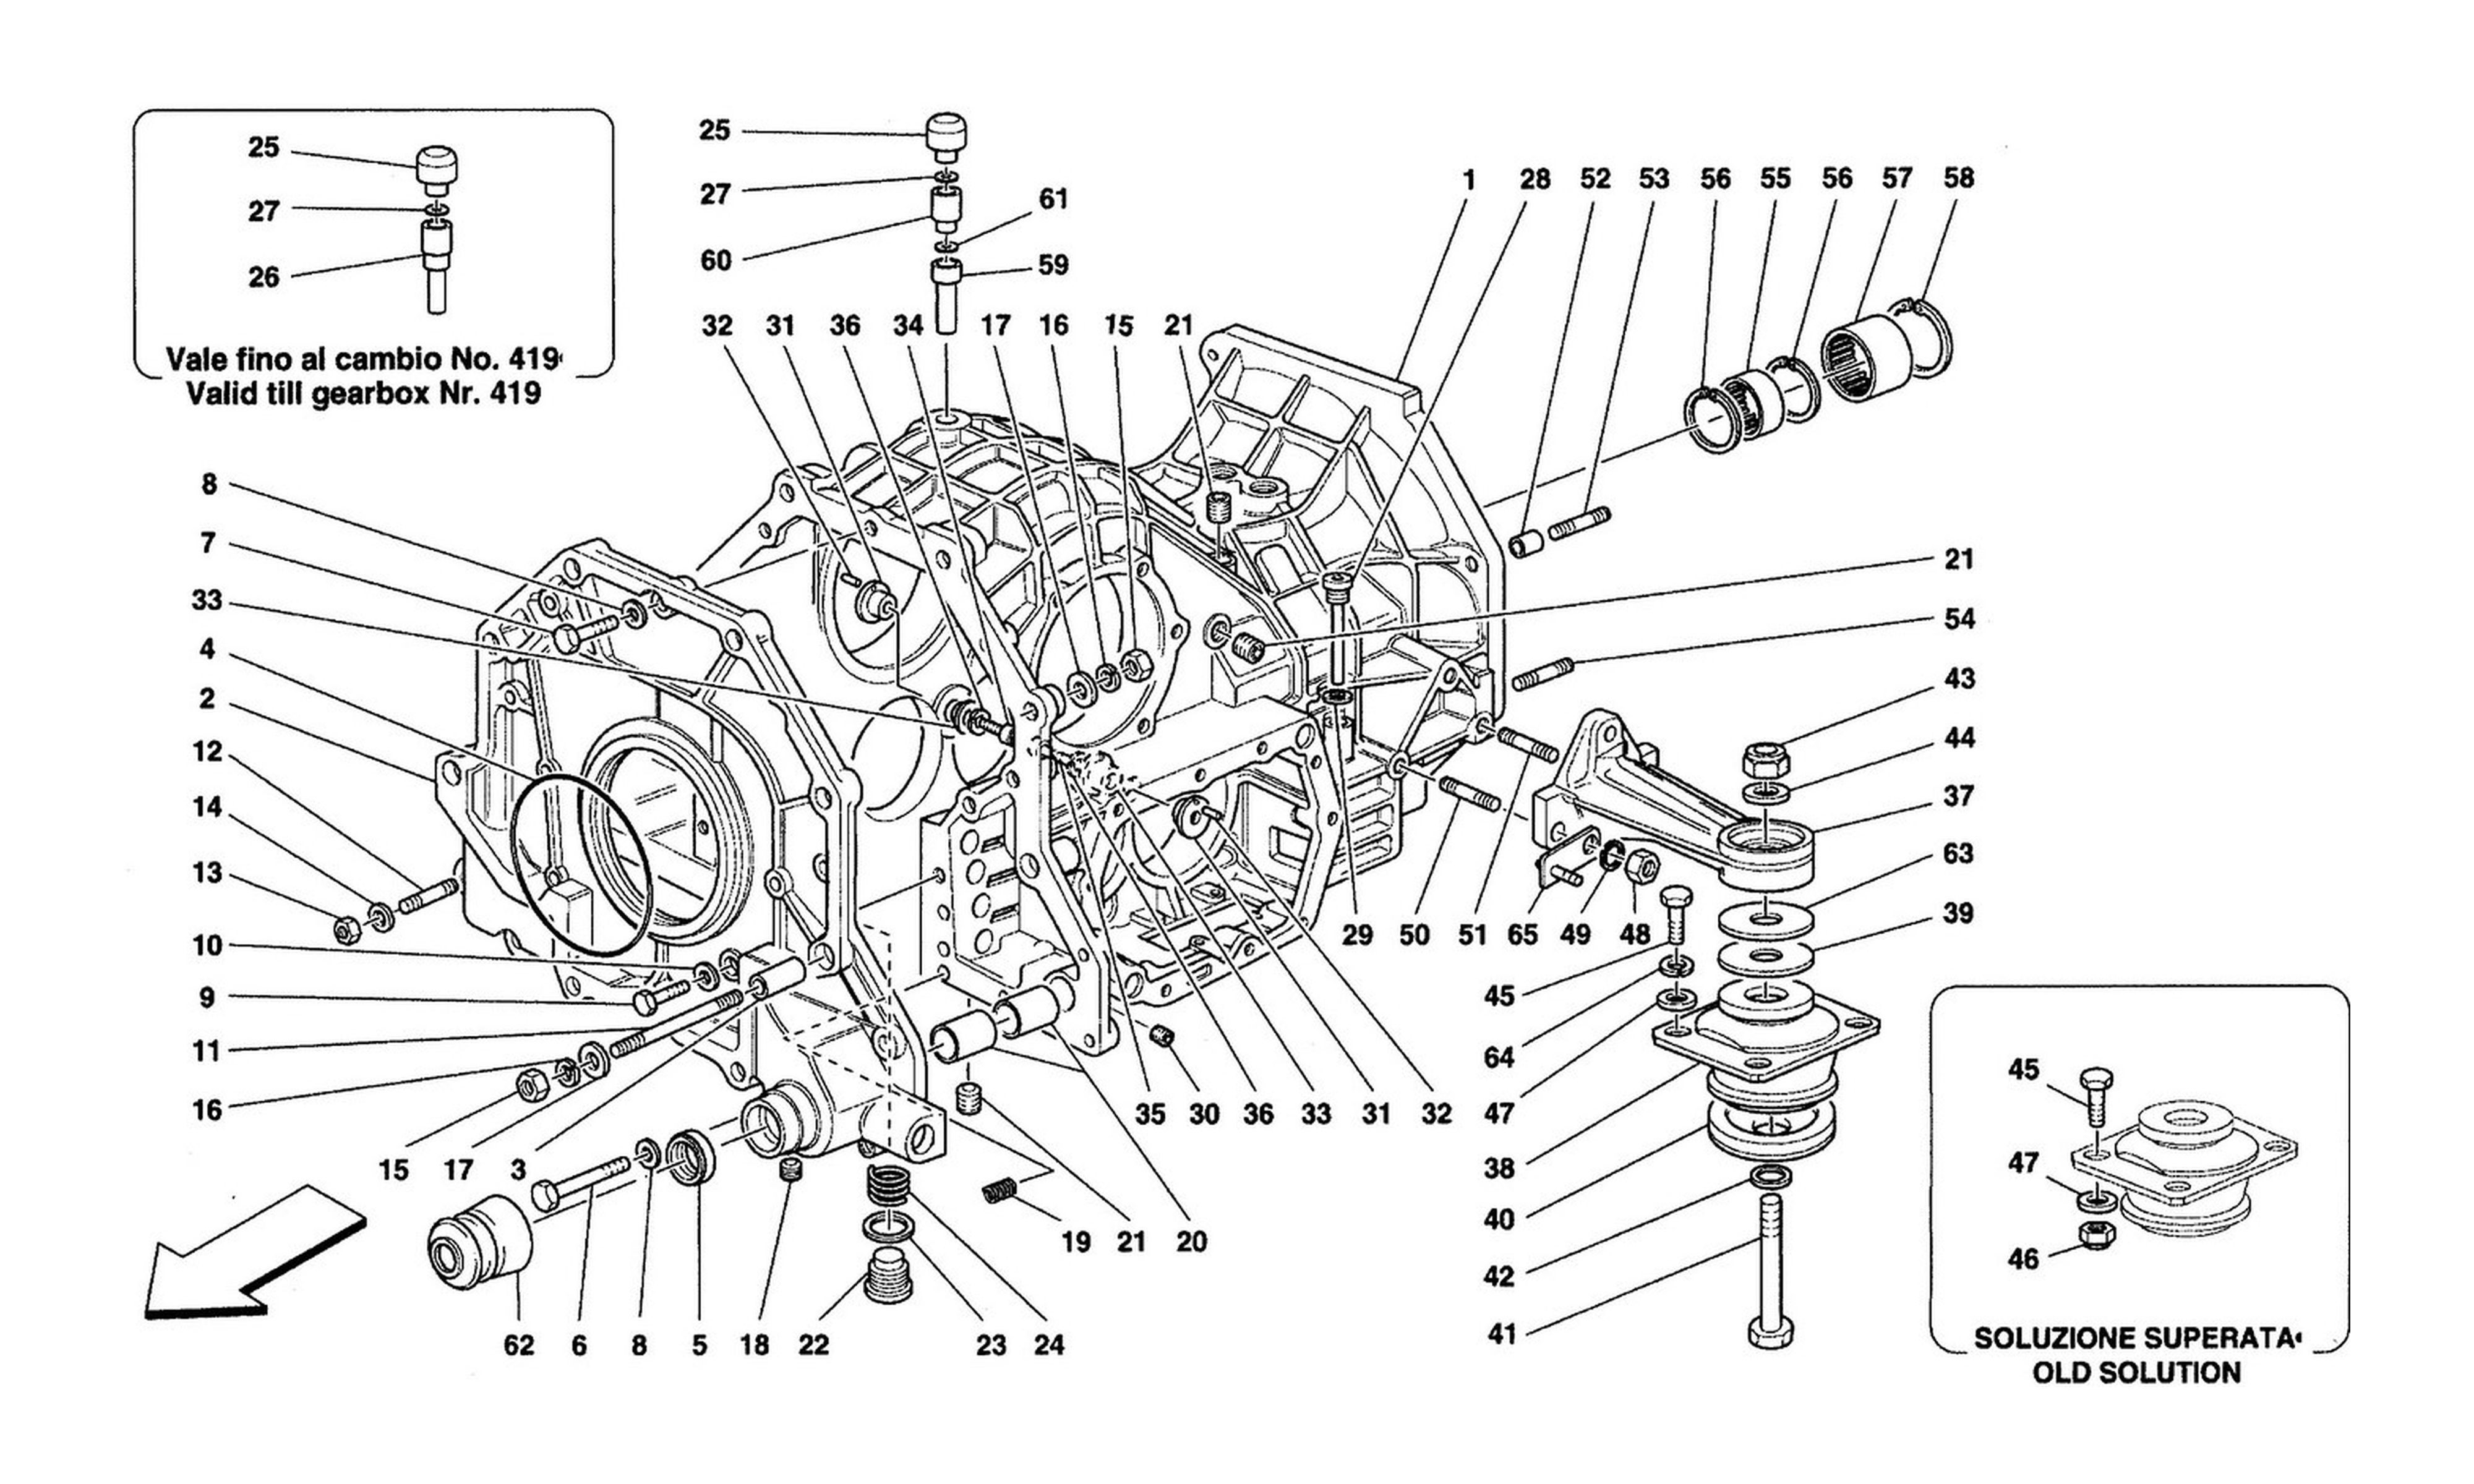 Schematic: Gearbox - Differential Housing And Intermediate Casing